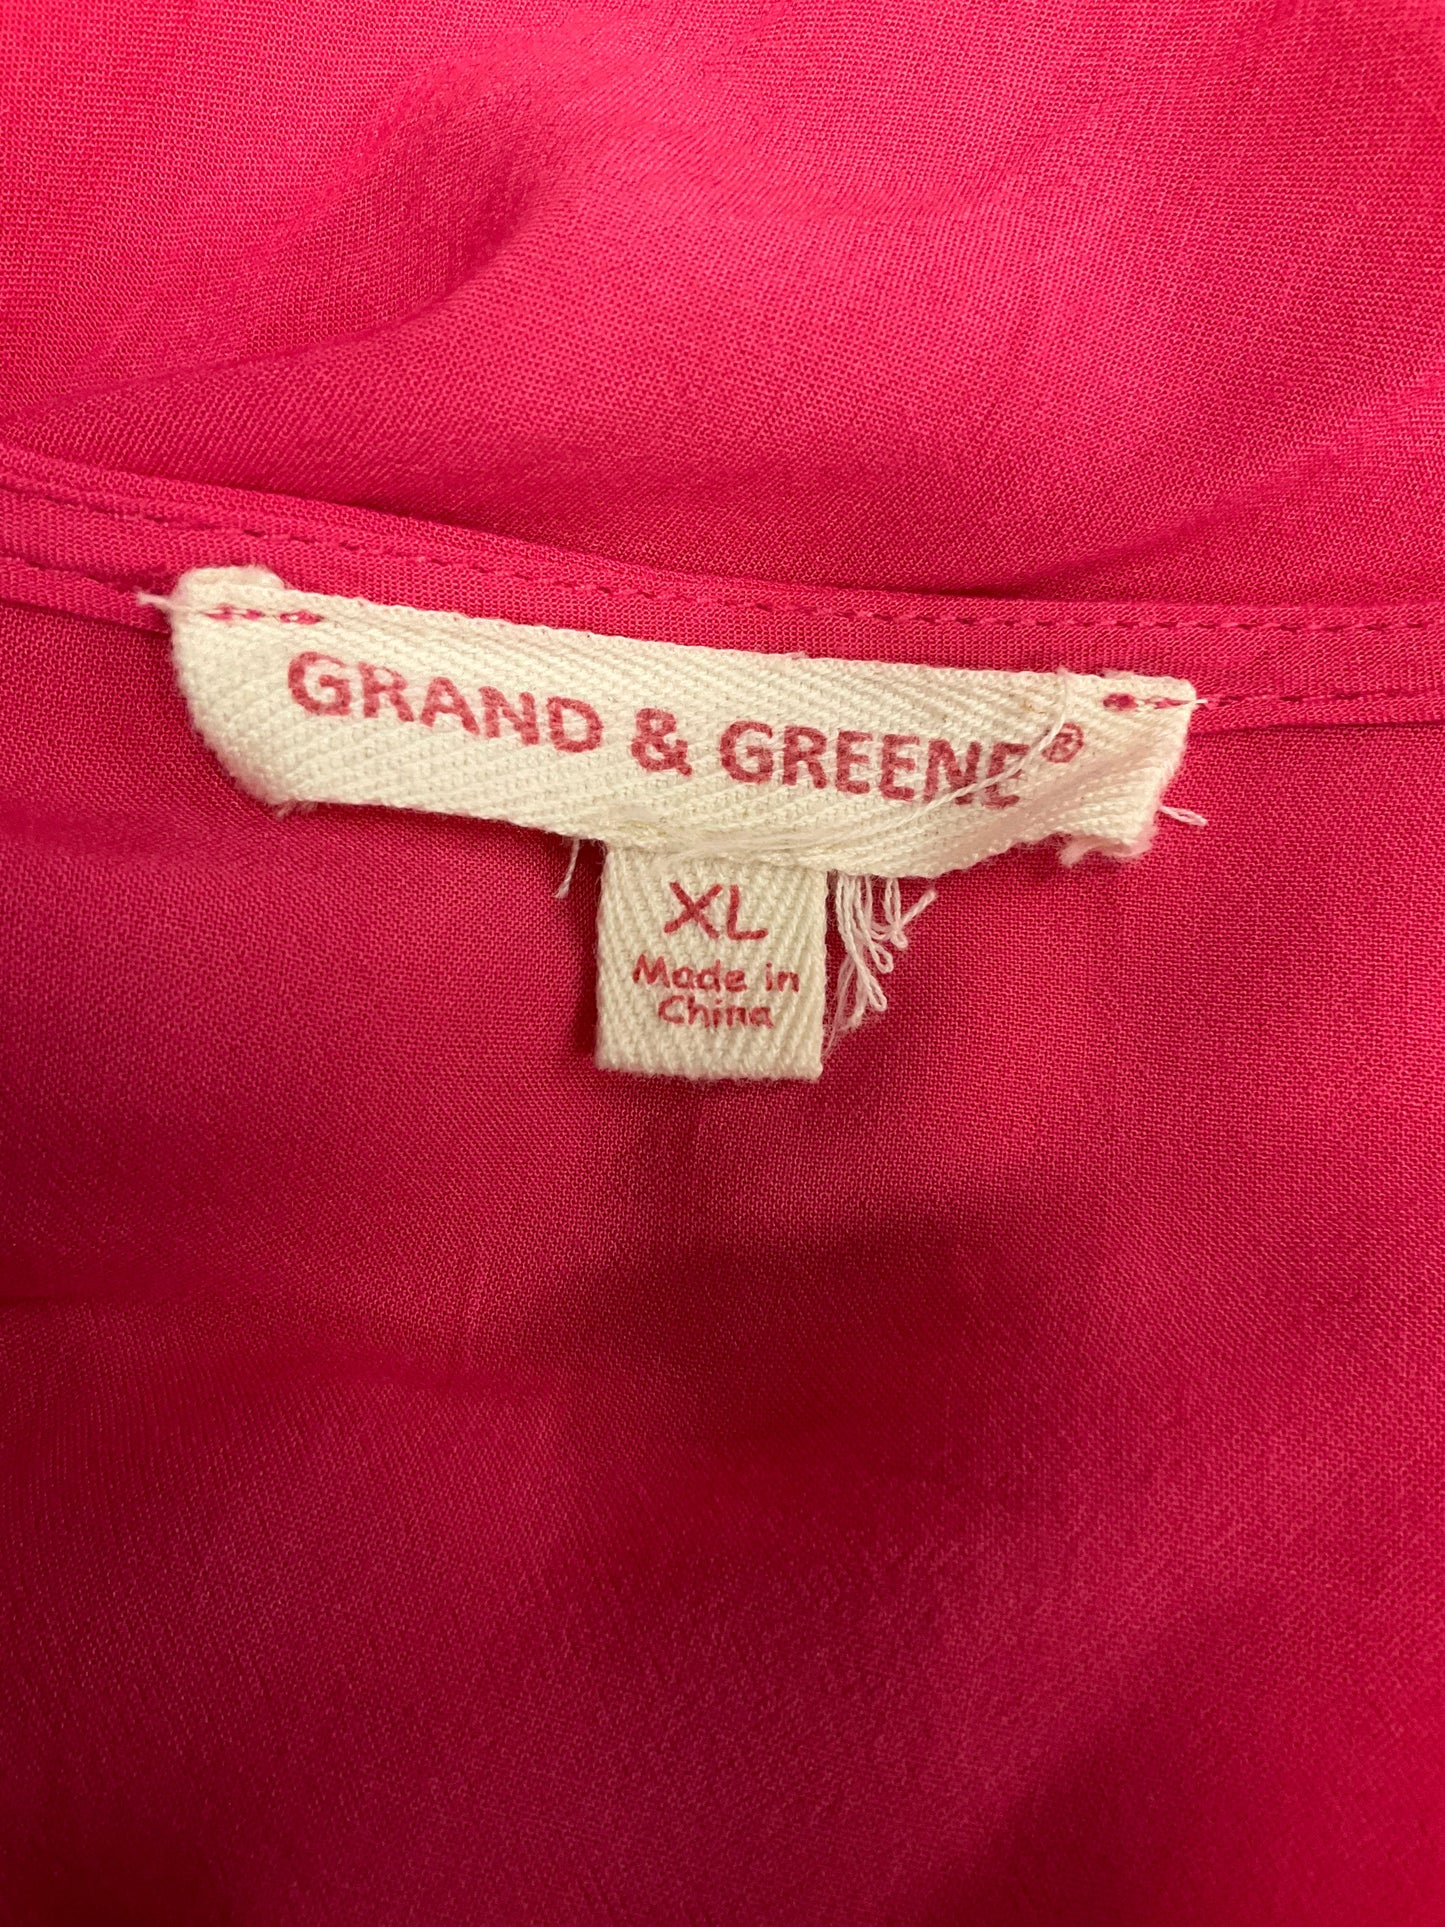 Pink Top 3/4 Sleeve Grand And Greene, Size Xl